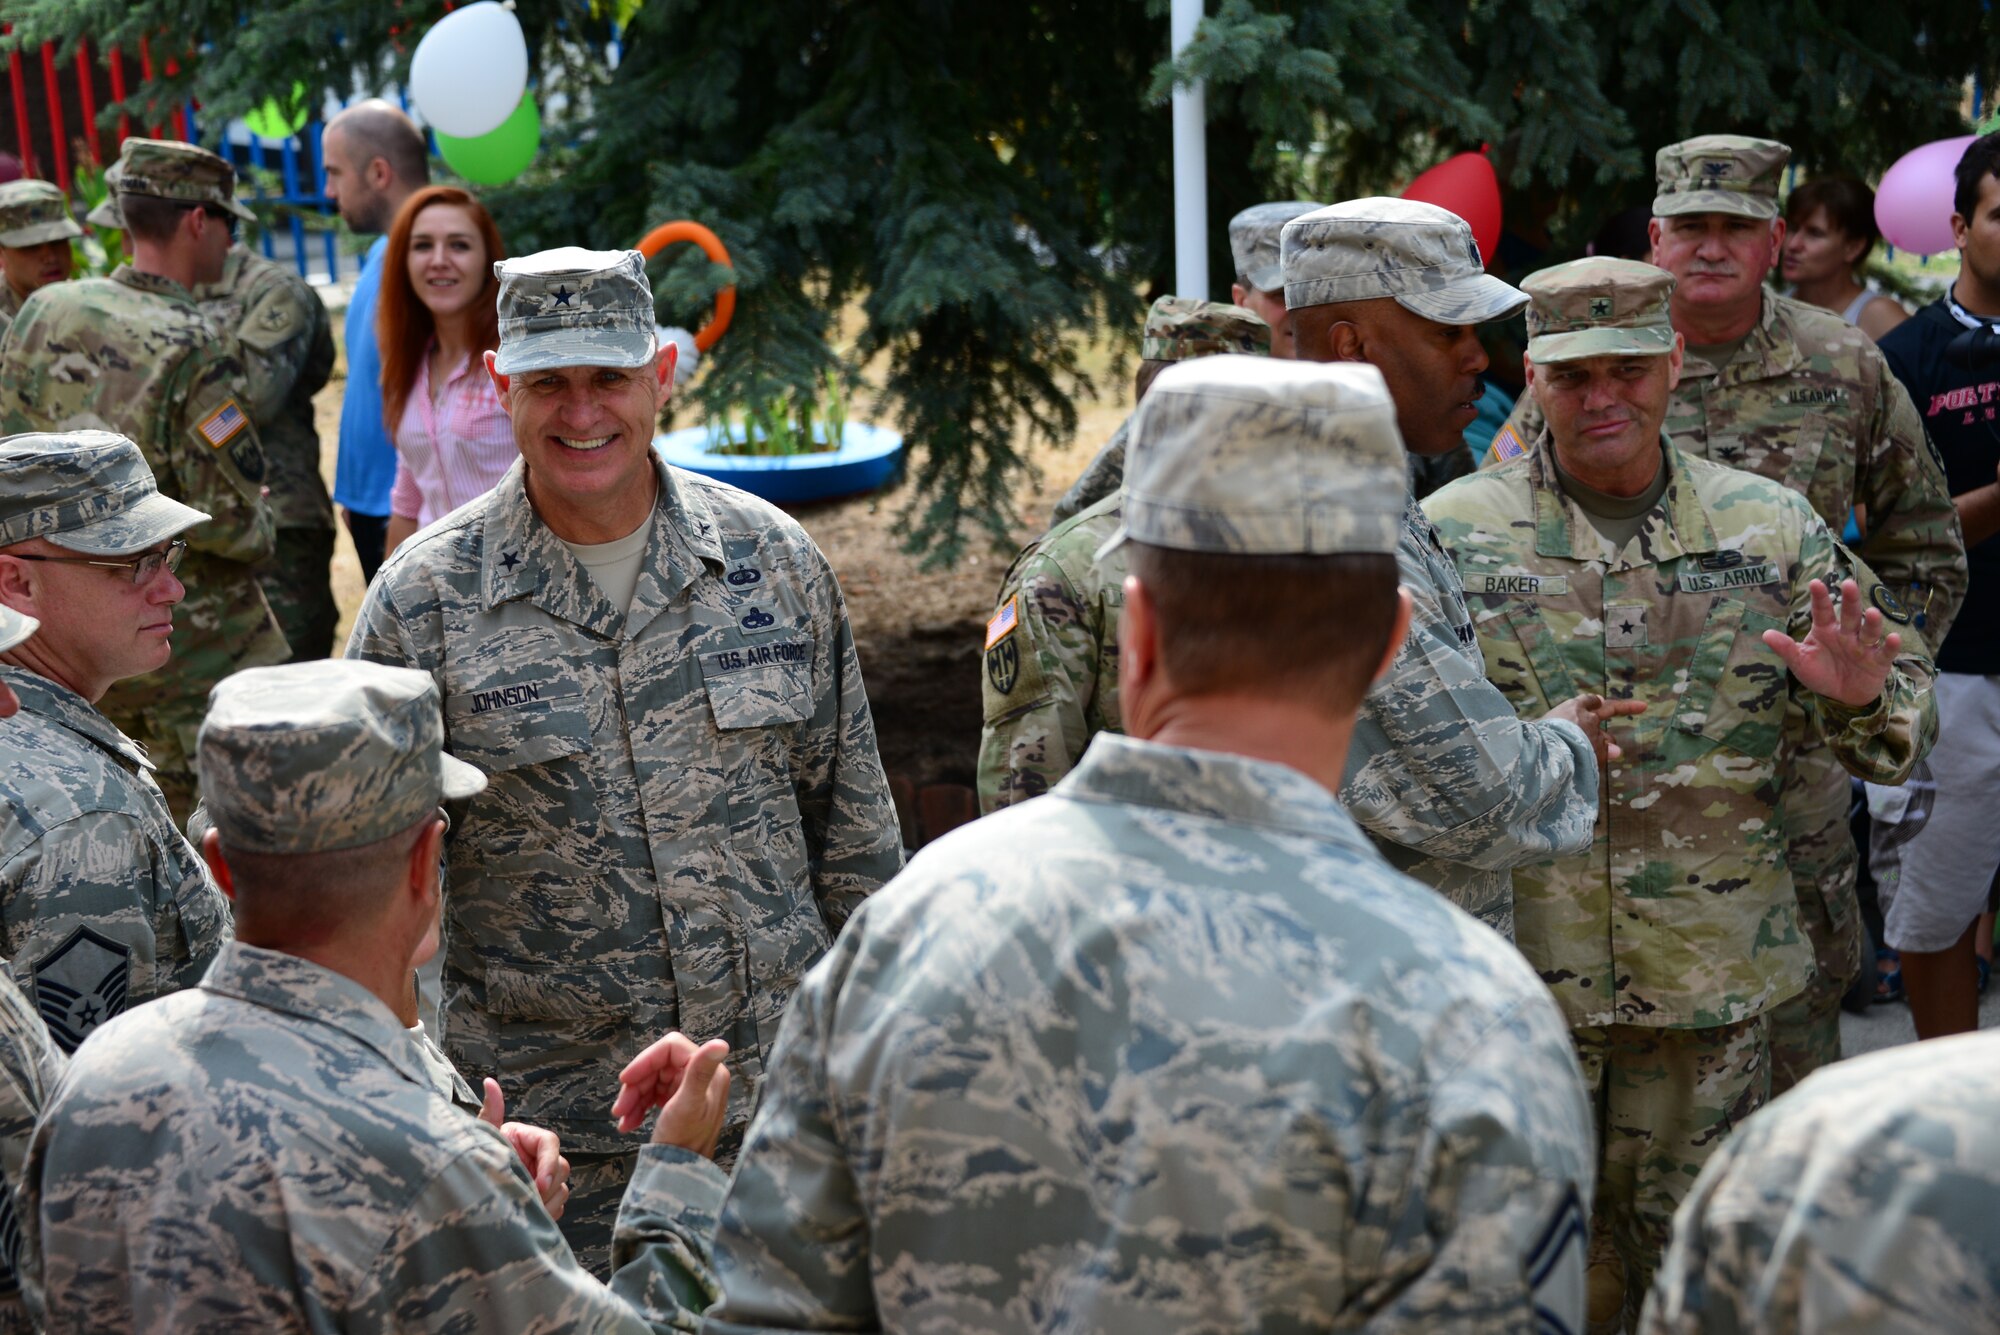 Brig. Gen. Donald Johnson, Assistant Adjutant Gen. (Air), Tennessee, greets Tennessee National Guard members at the grand re-opening of the Izvorche Kindergarten school in Kabile, Bulgaria, Aug. 24, 2016.  Tennessee National Guard Soldiers and Airmen from the 164th Civil Engineer Squadron, 118th Mission Support Group, 134th Air Refueling Wing, and the 194th Engineer Brigade deployed to nearby Novo Selo Training Area for thier annual training to participate in Humanitarian Civic Assistance projects such as the renovation of the school.  The projects build skills for the Airmen while helping to strengthen ties with Tennessee and Bulgaria through the State Partnership Program.  (U.S. Air National Guard photo by Master Sgt. Kendra M. Owenby, 134 ARW Public Affairs)